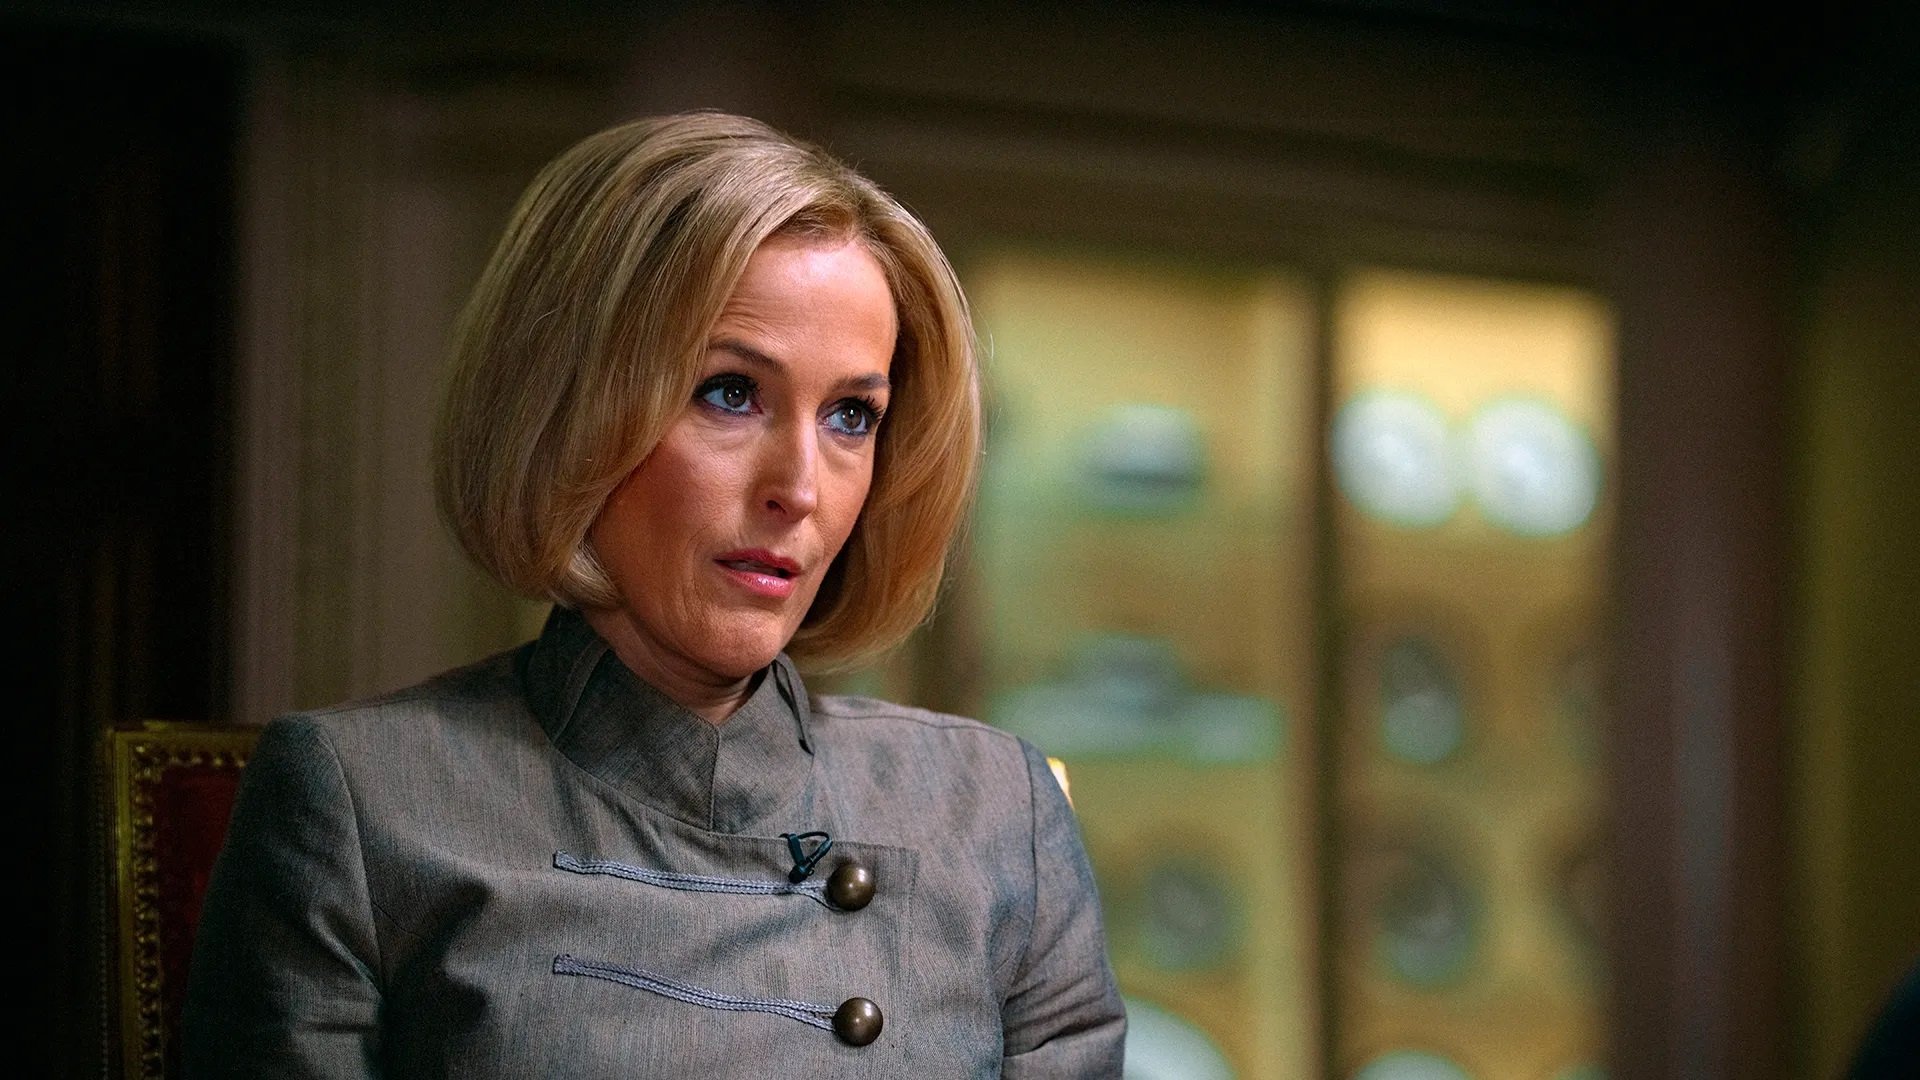 Gillian Anderson plays broadcaster Emily Maitlas in Scoop.